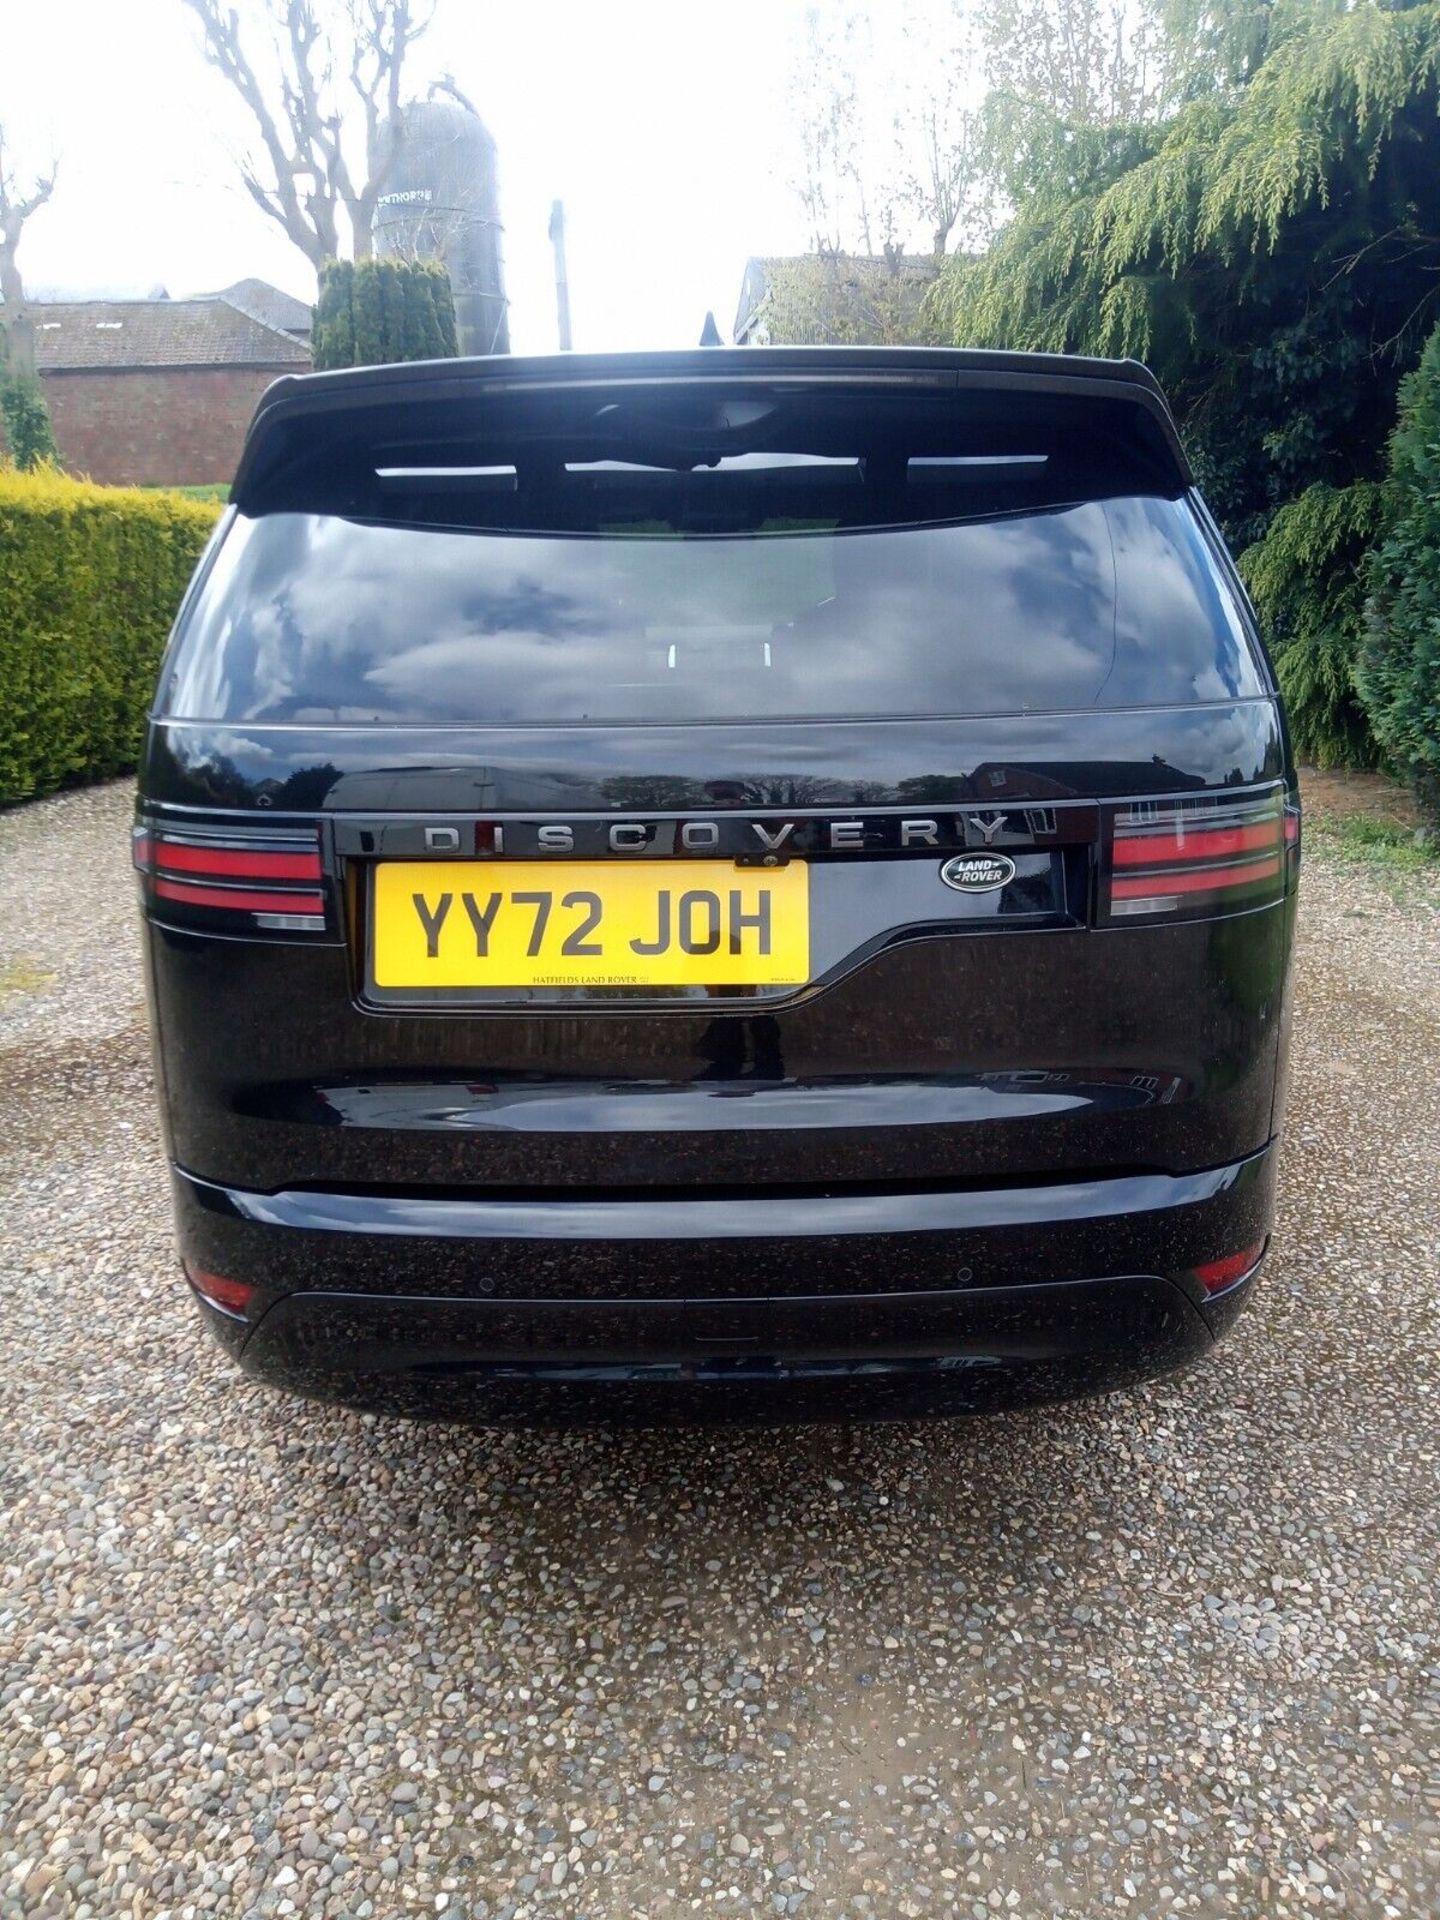 2022 LAND ROVER DISCOVERY R DYNAMIC HSE - RARE REAR SEAT CONVERSION - IMMACULATE CONDITION! - Image 7 of 18